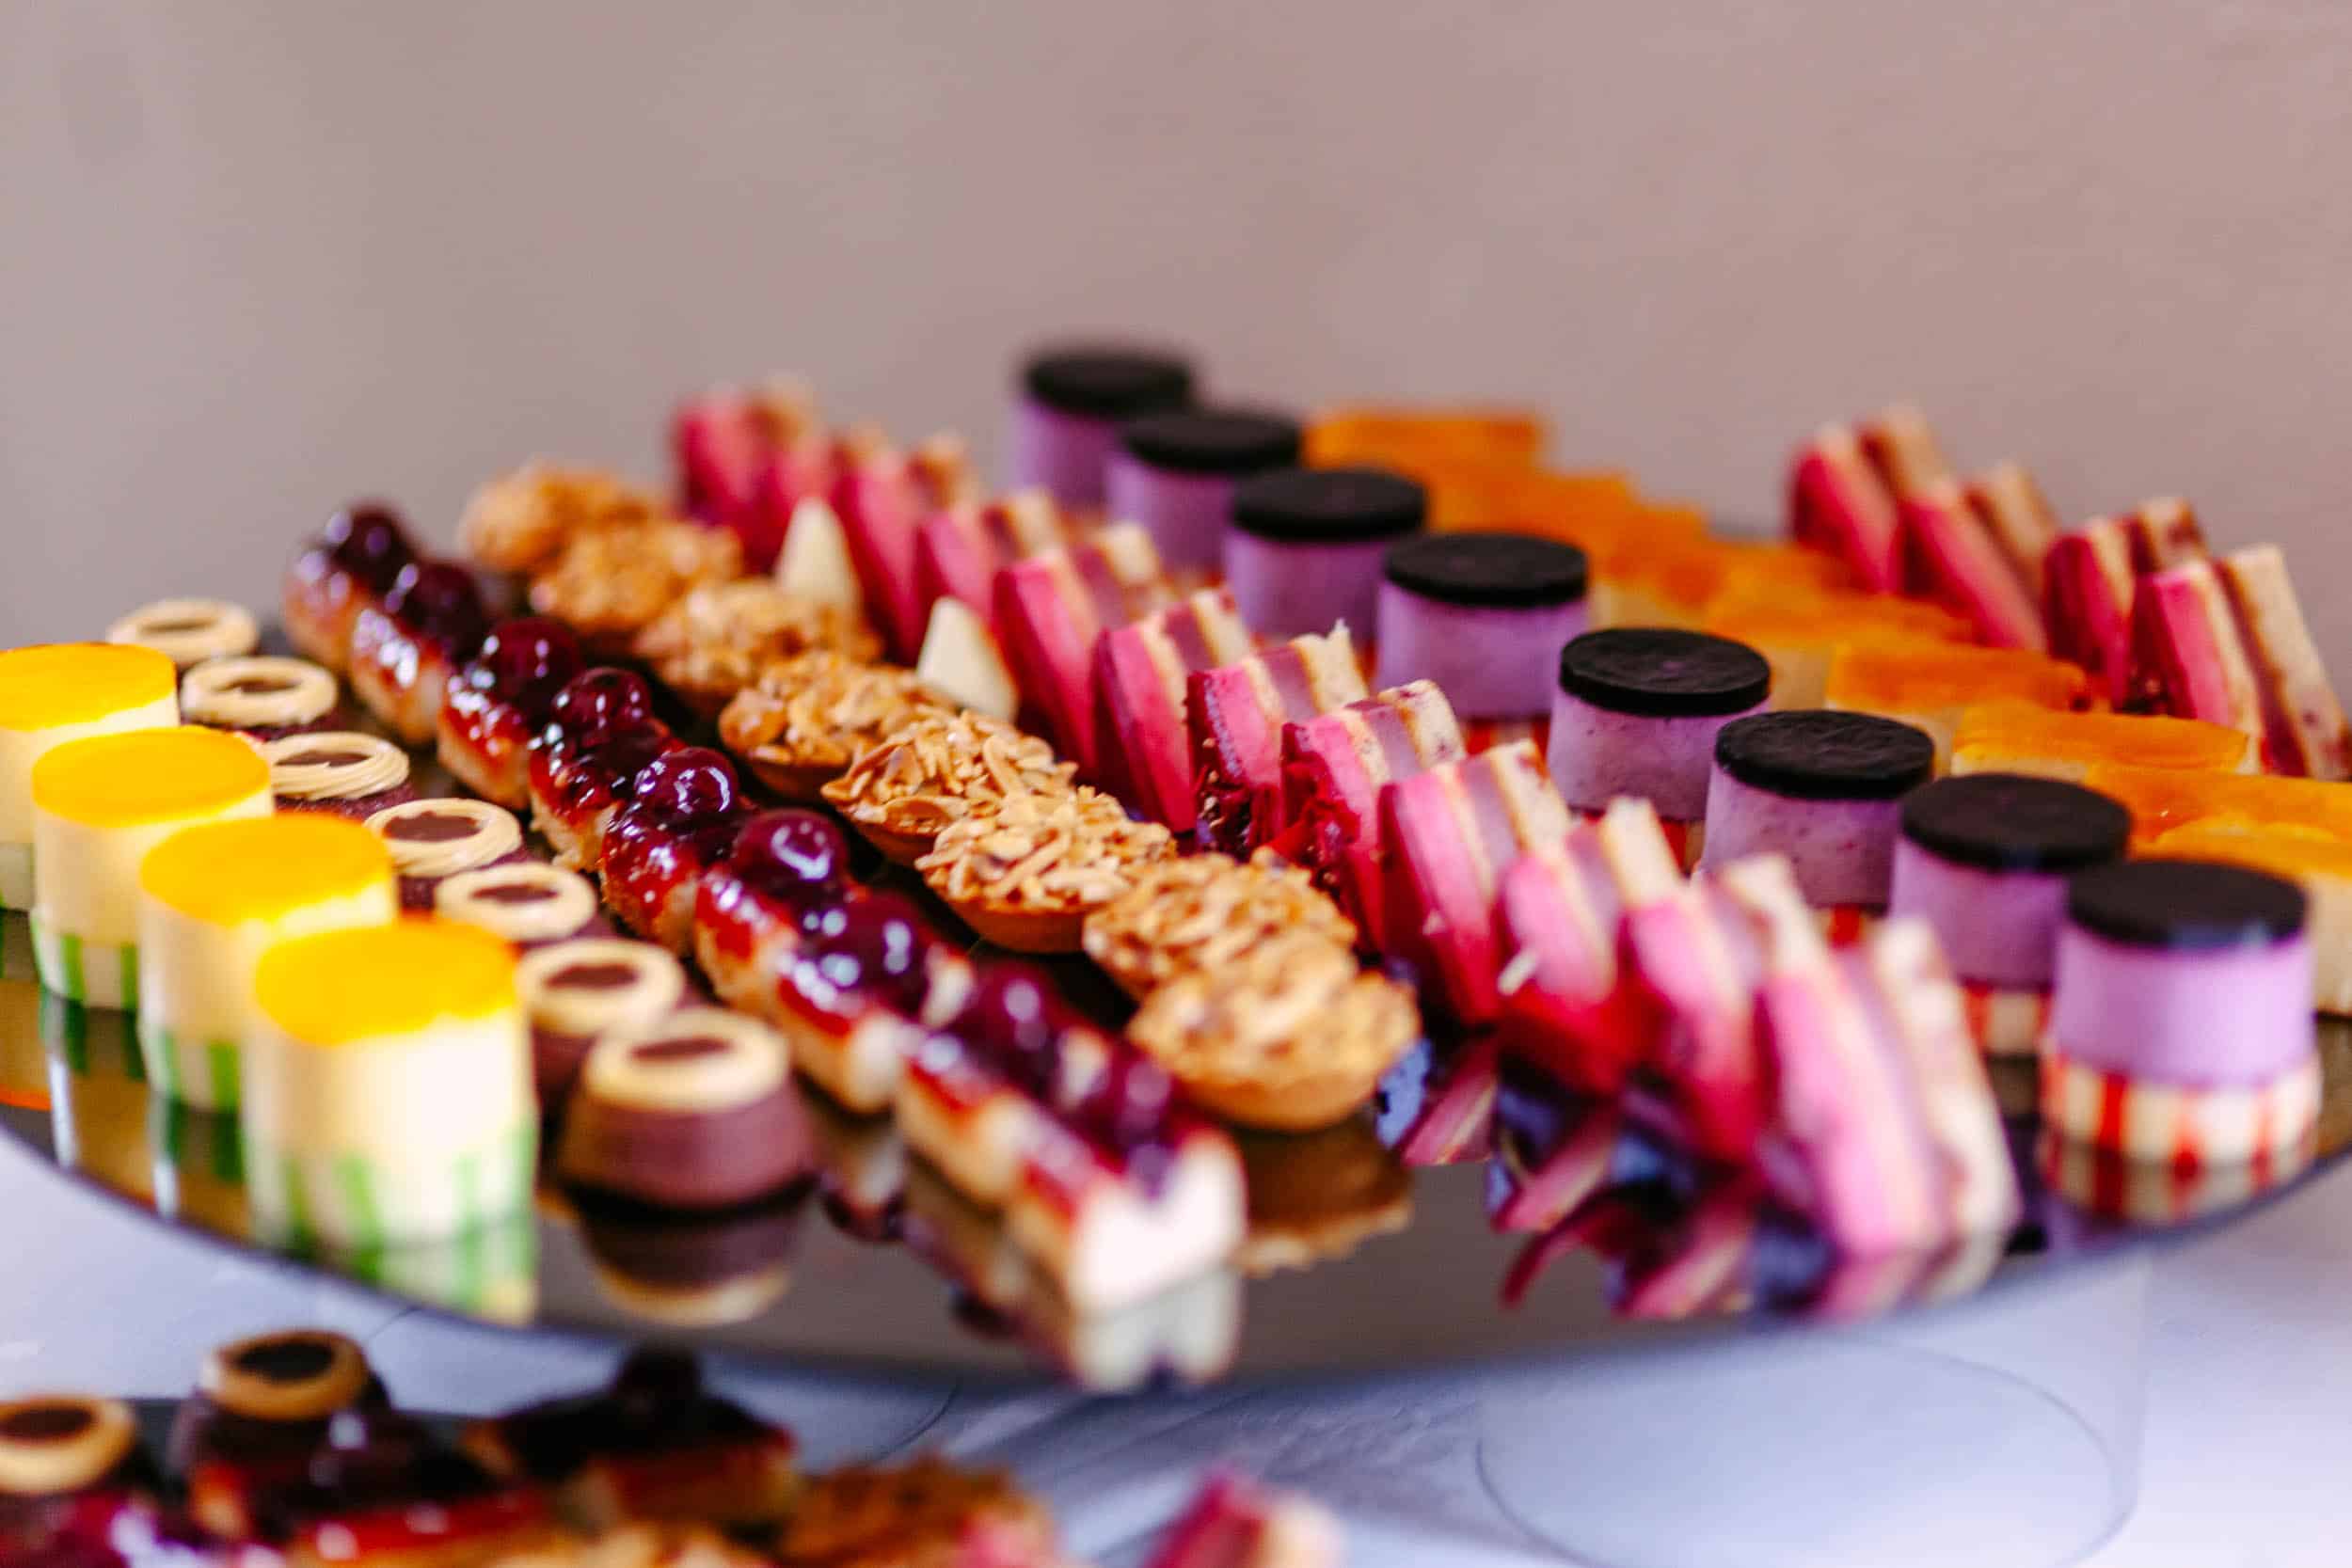 A tray of desserts on the table.